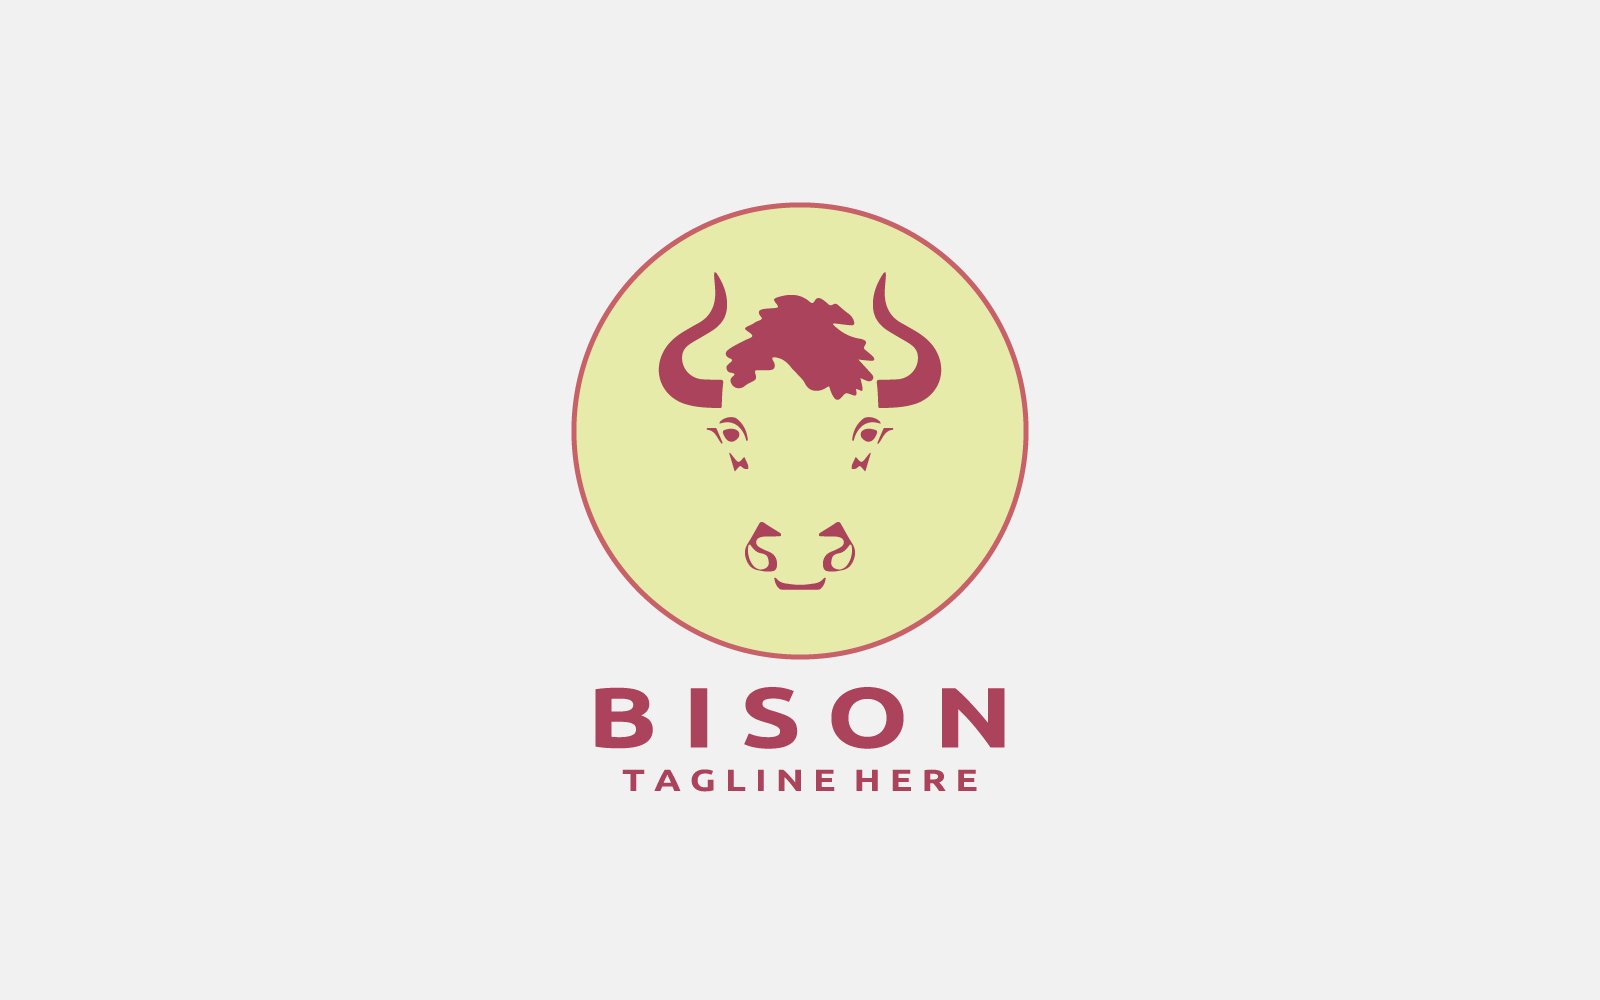 Template #381894 Logo Bison Webdesign Template - Logo template Preview